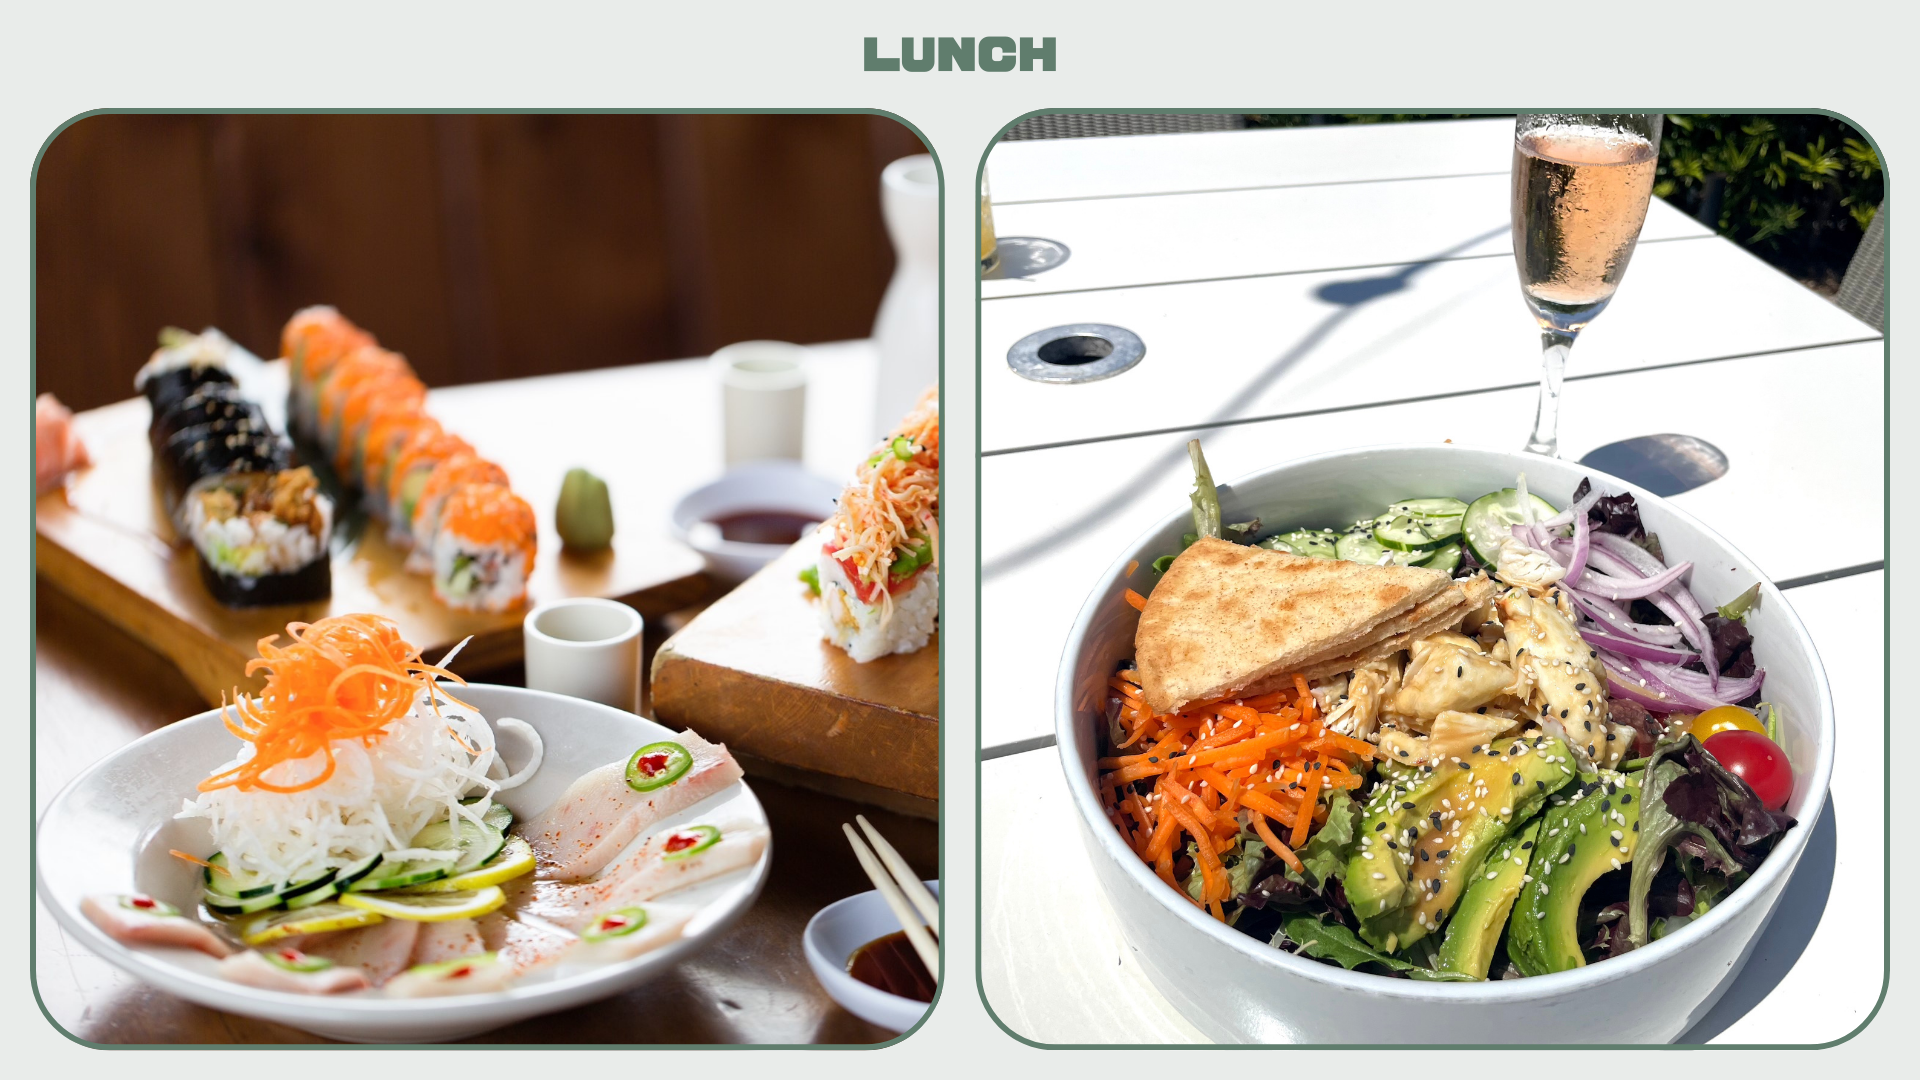 L: Sushi from Harbor Docks; R: Lunch bowl at George's 